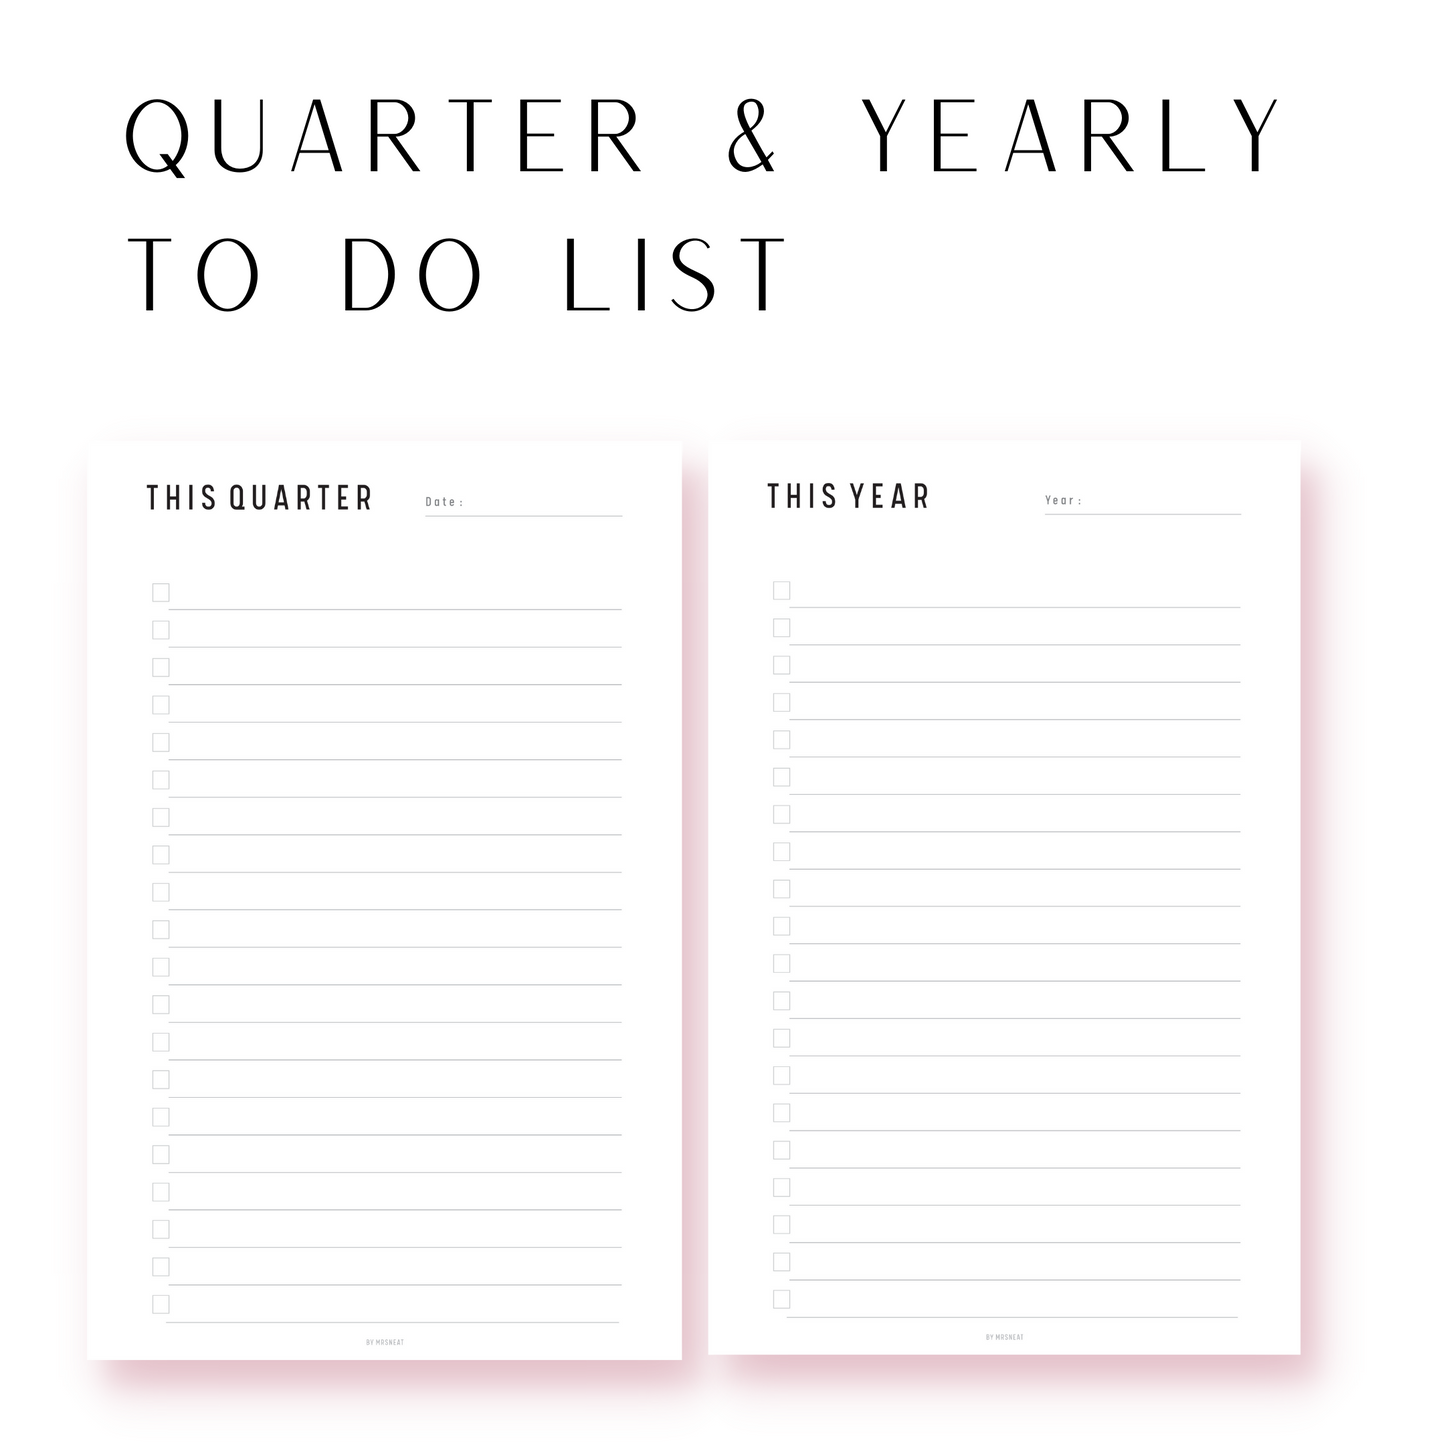 Quarterly & Yearly To Do List Planner Printable